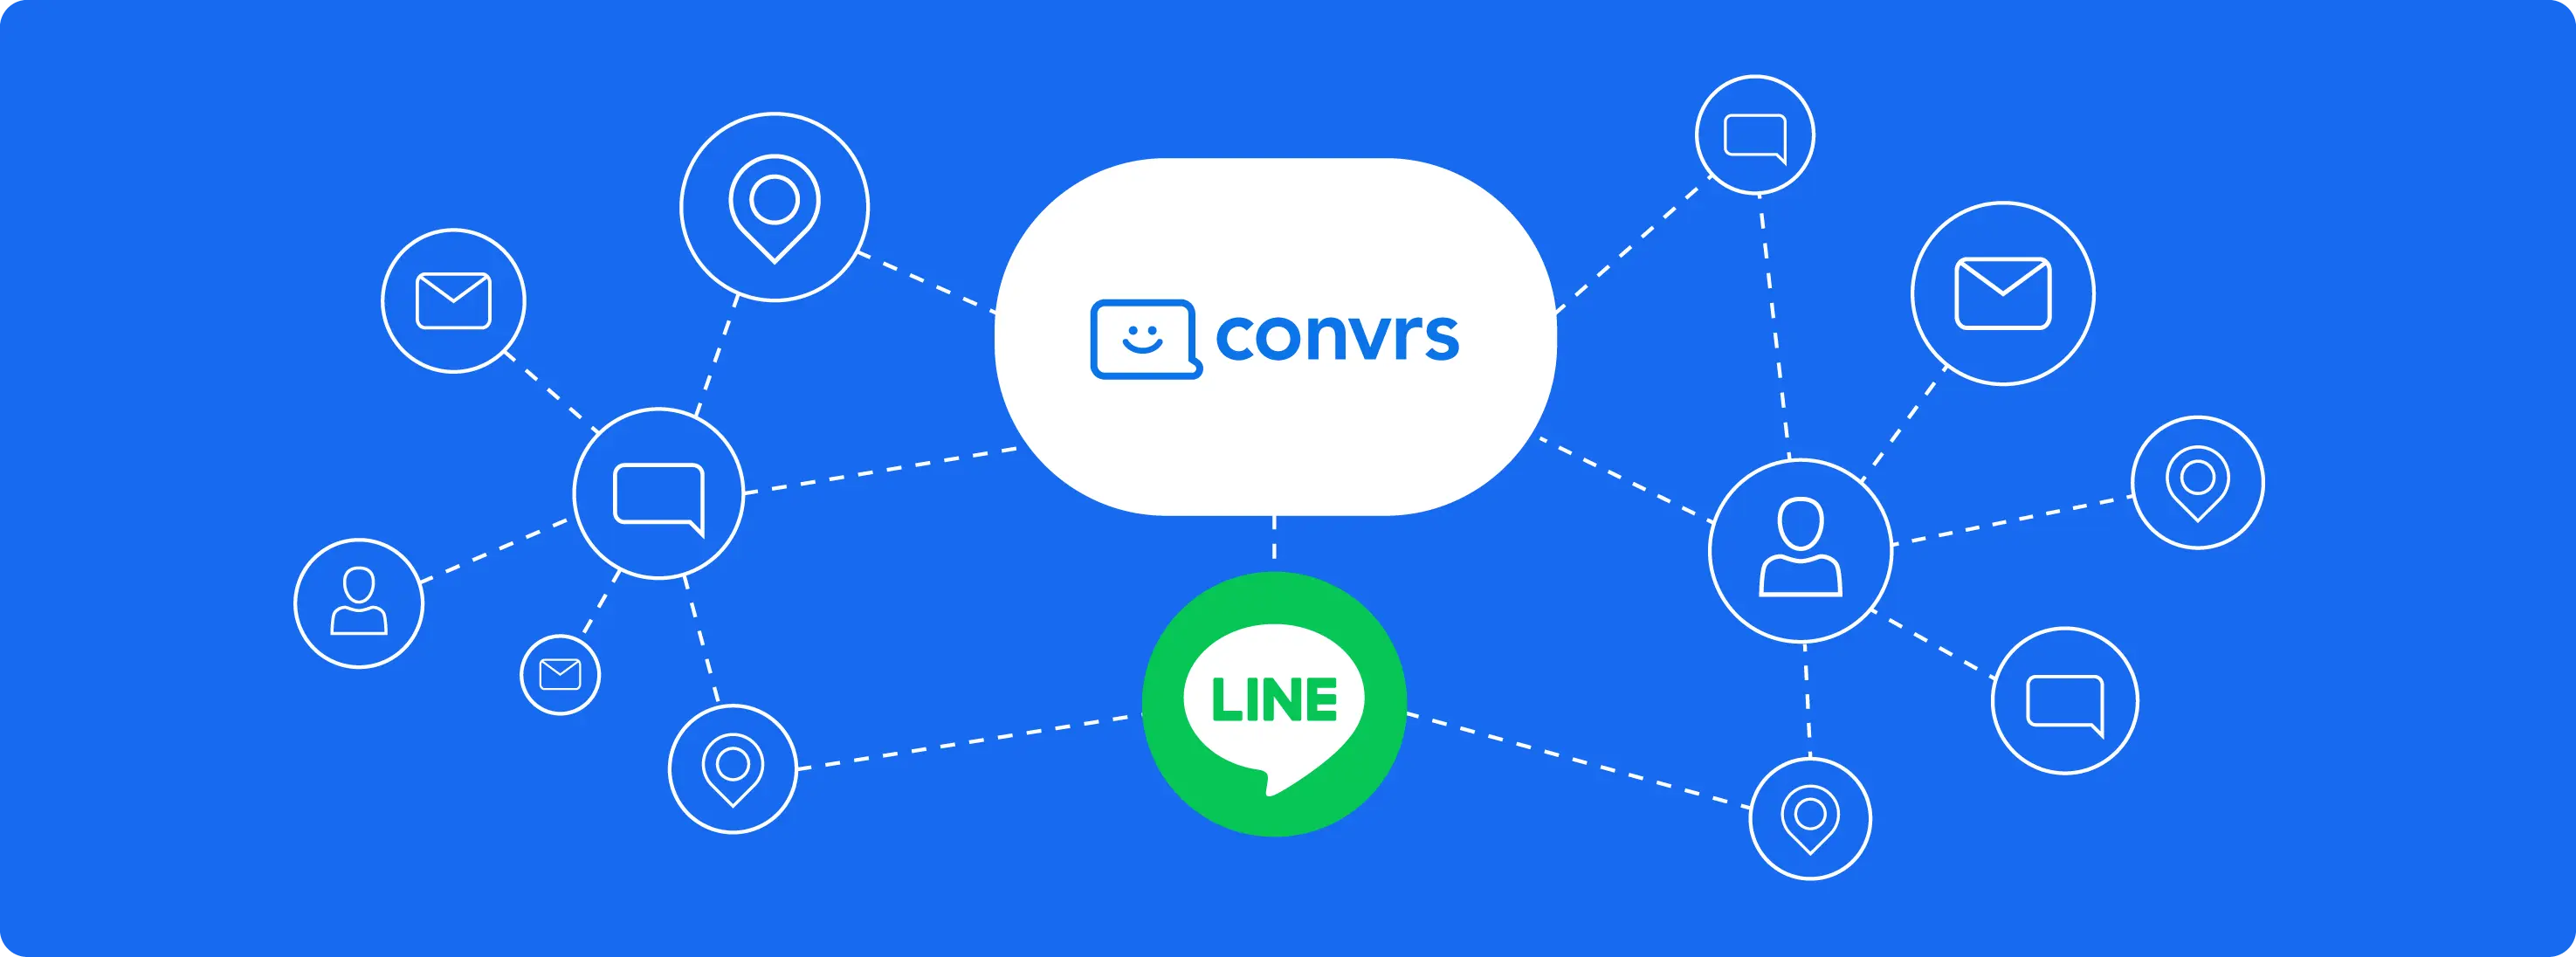 LINE - connecting people to business by messaging to CRM's such as Salesforce